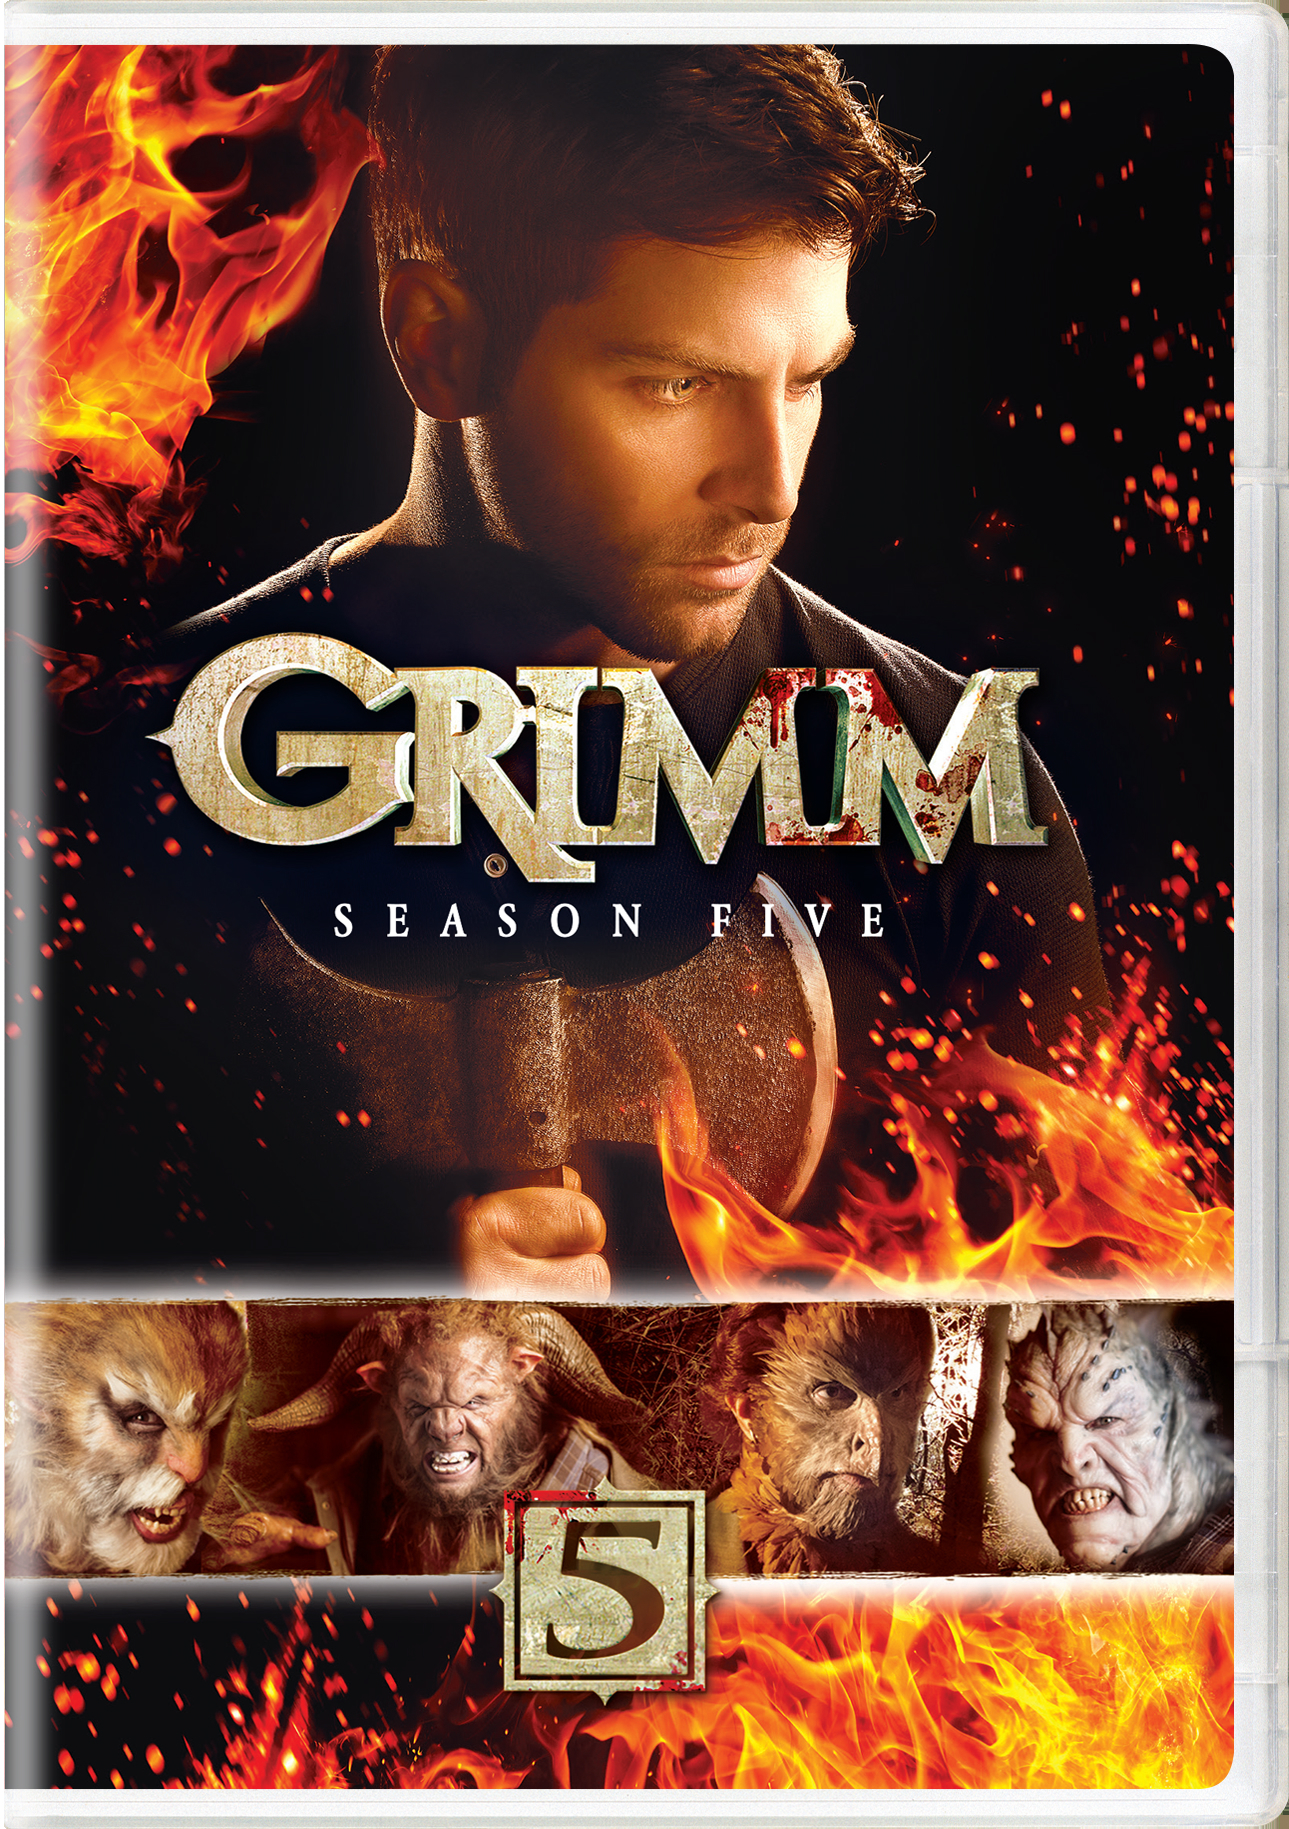 Grimm: Season 5 - DVD [ 2016 ]  - Sci Fi Television On DVD - TV Shows On GRUV